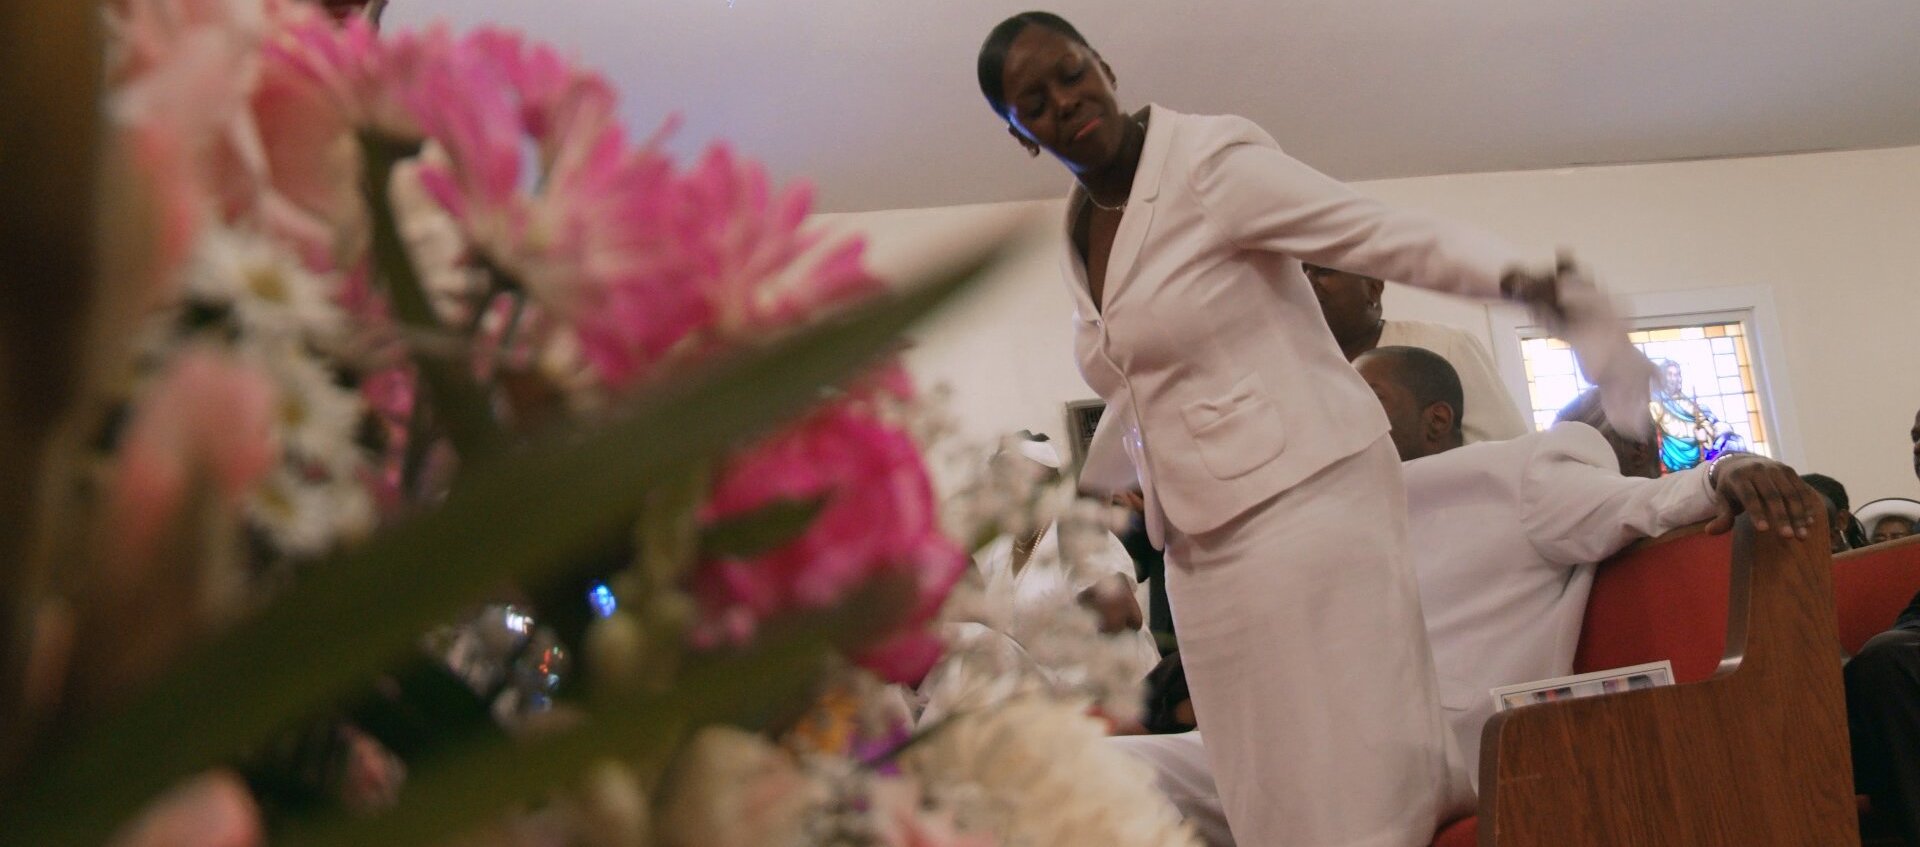 A Black feminine-presenting person is mid-movement as she attends a funeral at the Owens Funeral Home behind a close-up of a bundle of pink and white flowers.